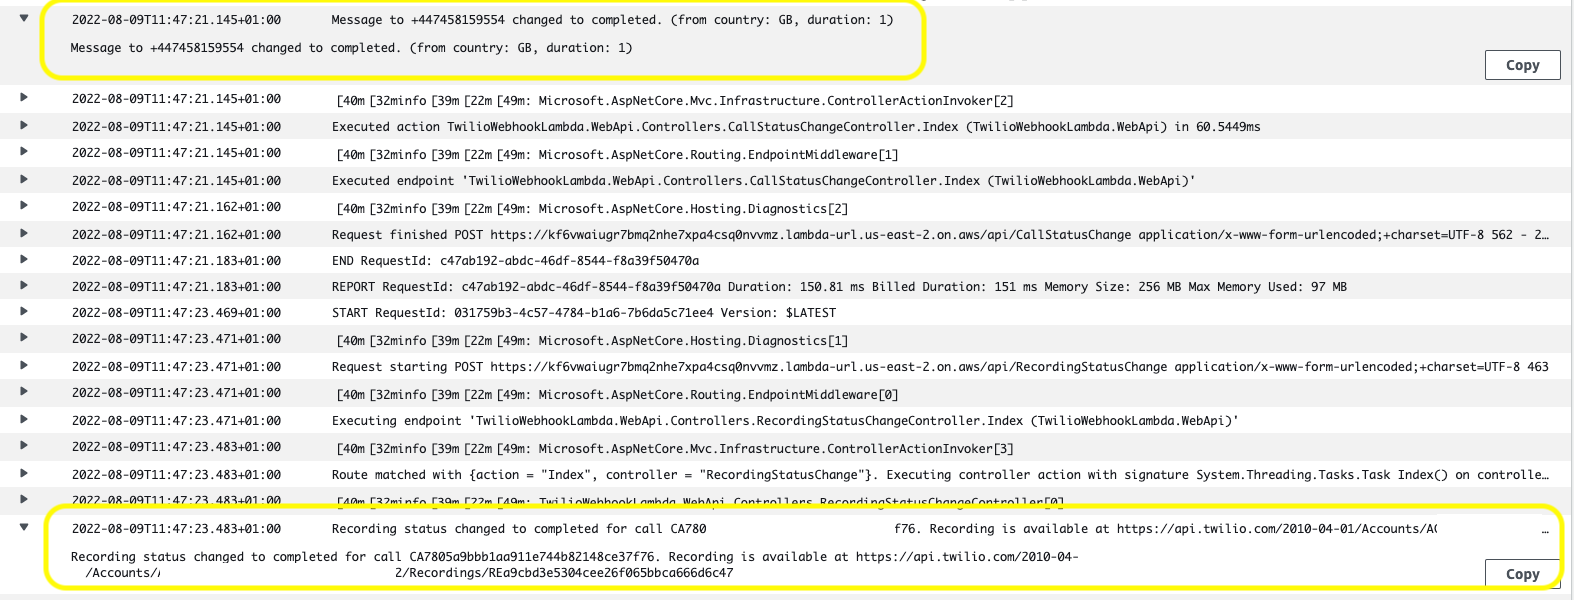 CloudWatch logs showing callback logs for call status change and call recording status